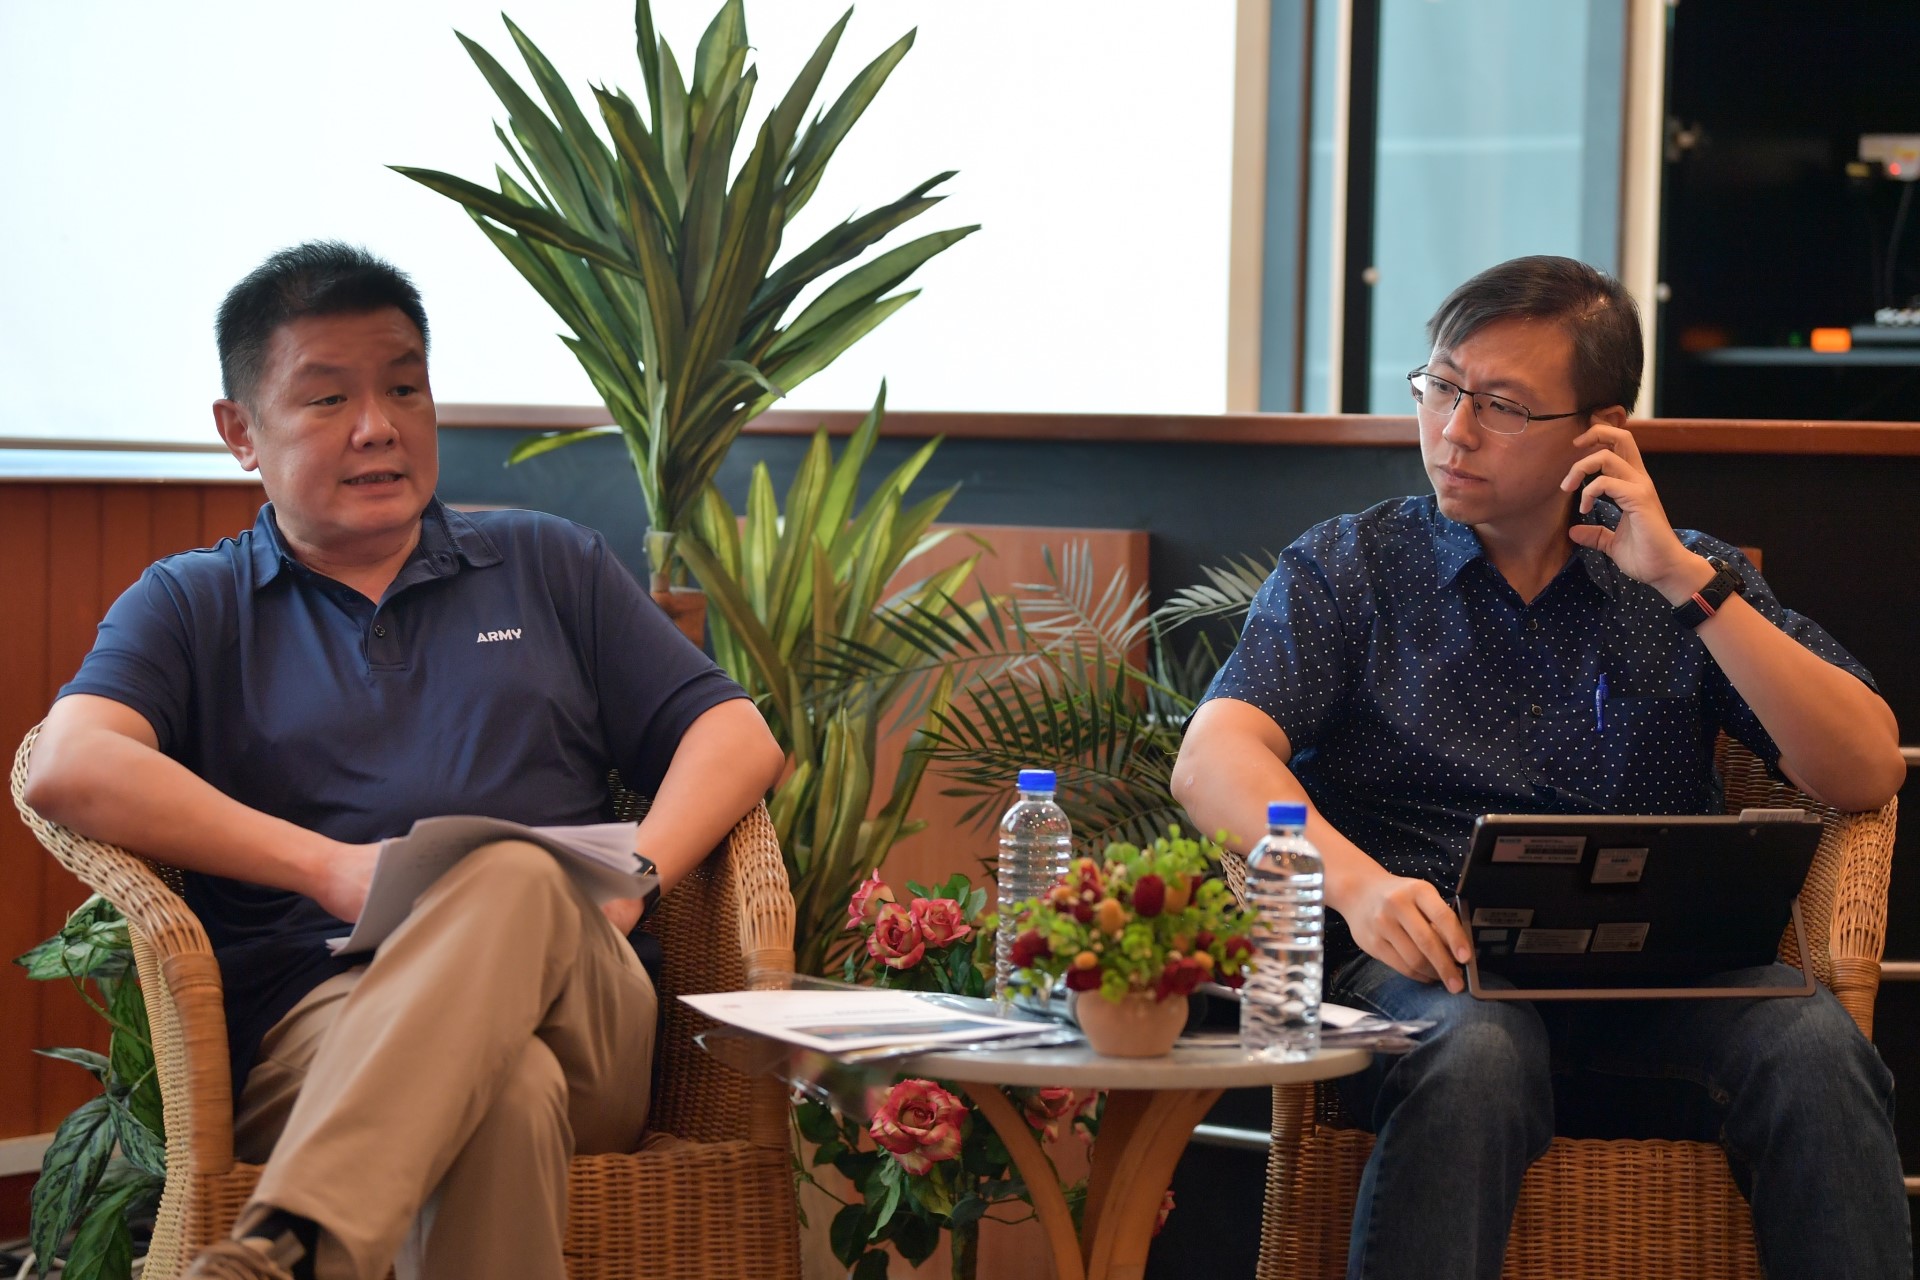 Co-chairmen of the NS55 Executive Committee Director National Service Affairs Mr Kenneth Liow (left) and Director Manpower Mr Ho Chin Ning (right) briefing the media on the year-long NS55 campaign.